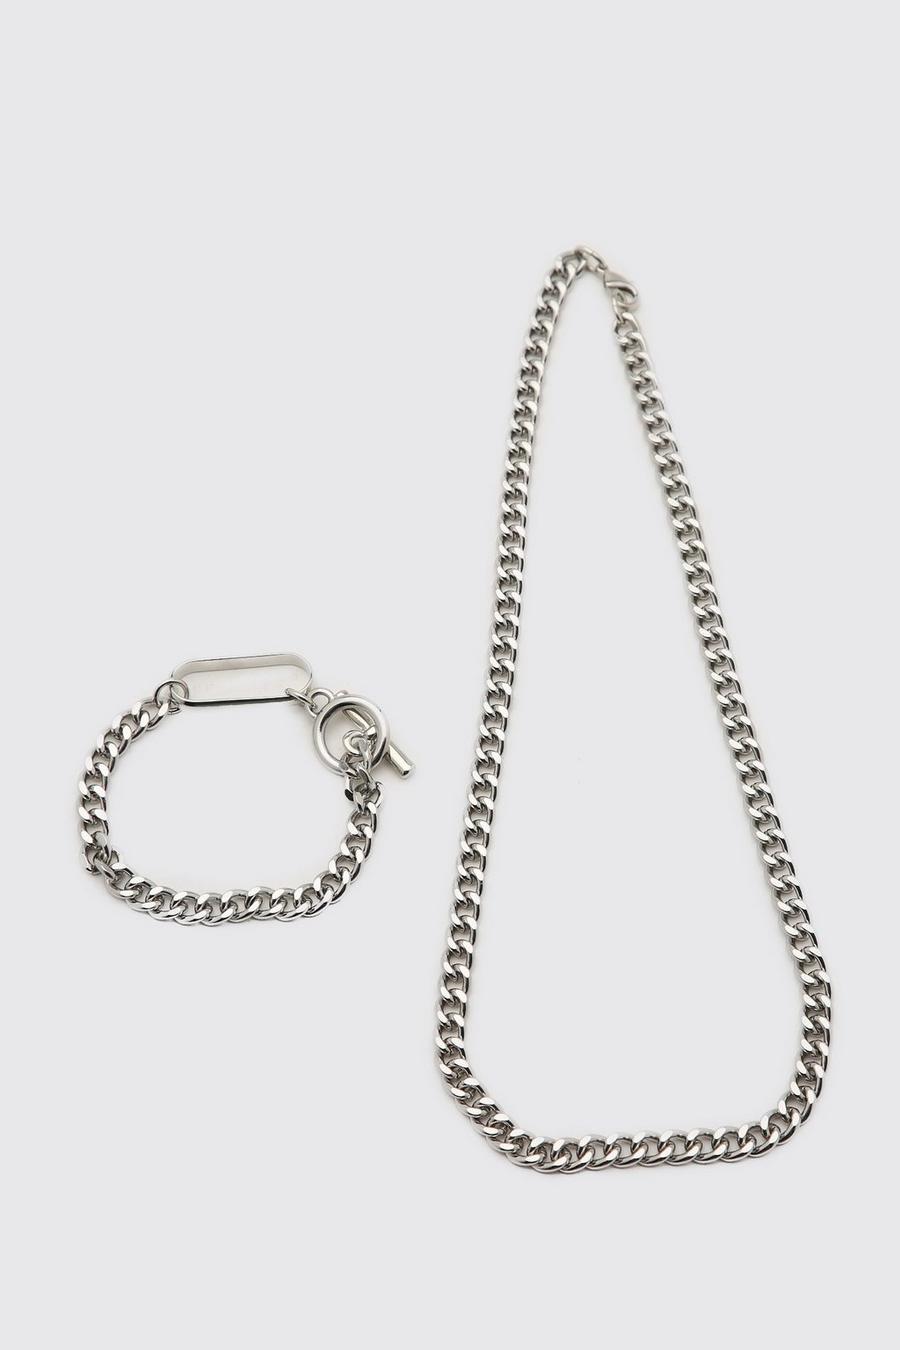 Silver Chunky Chain And Bracelet Set With Toggle